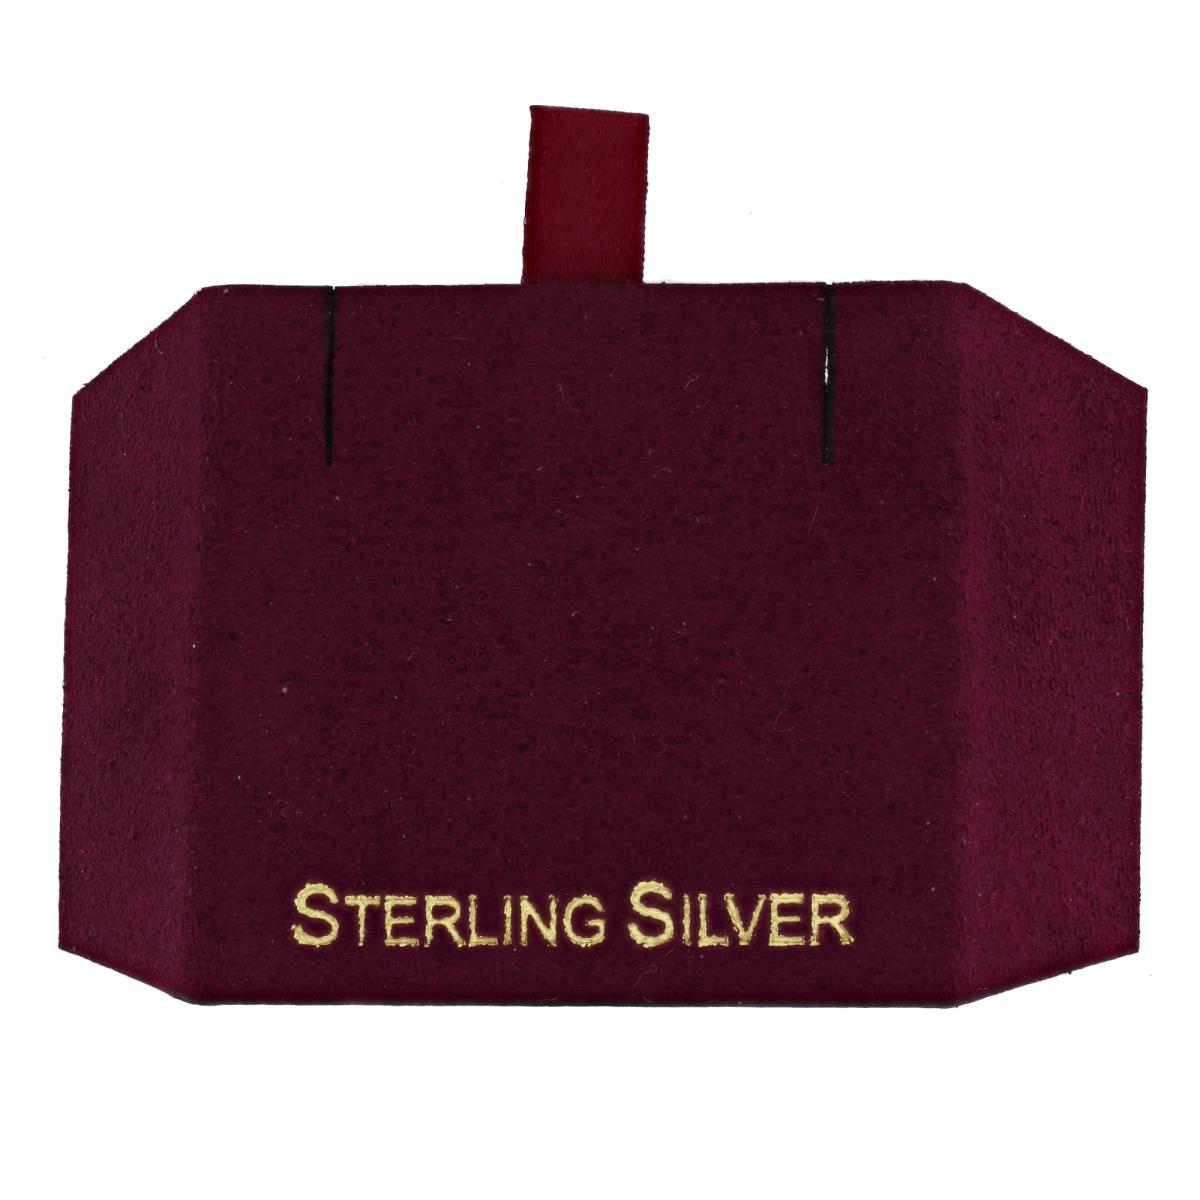 Wine Sterling Silver, Gold Foil Necklace Insert (Box B06-159/Green/D)